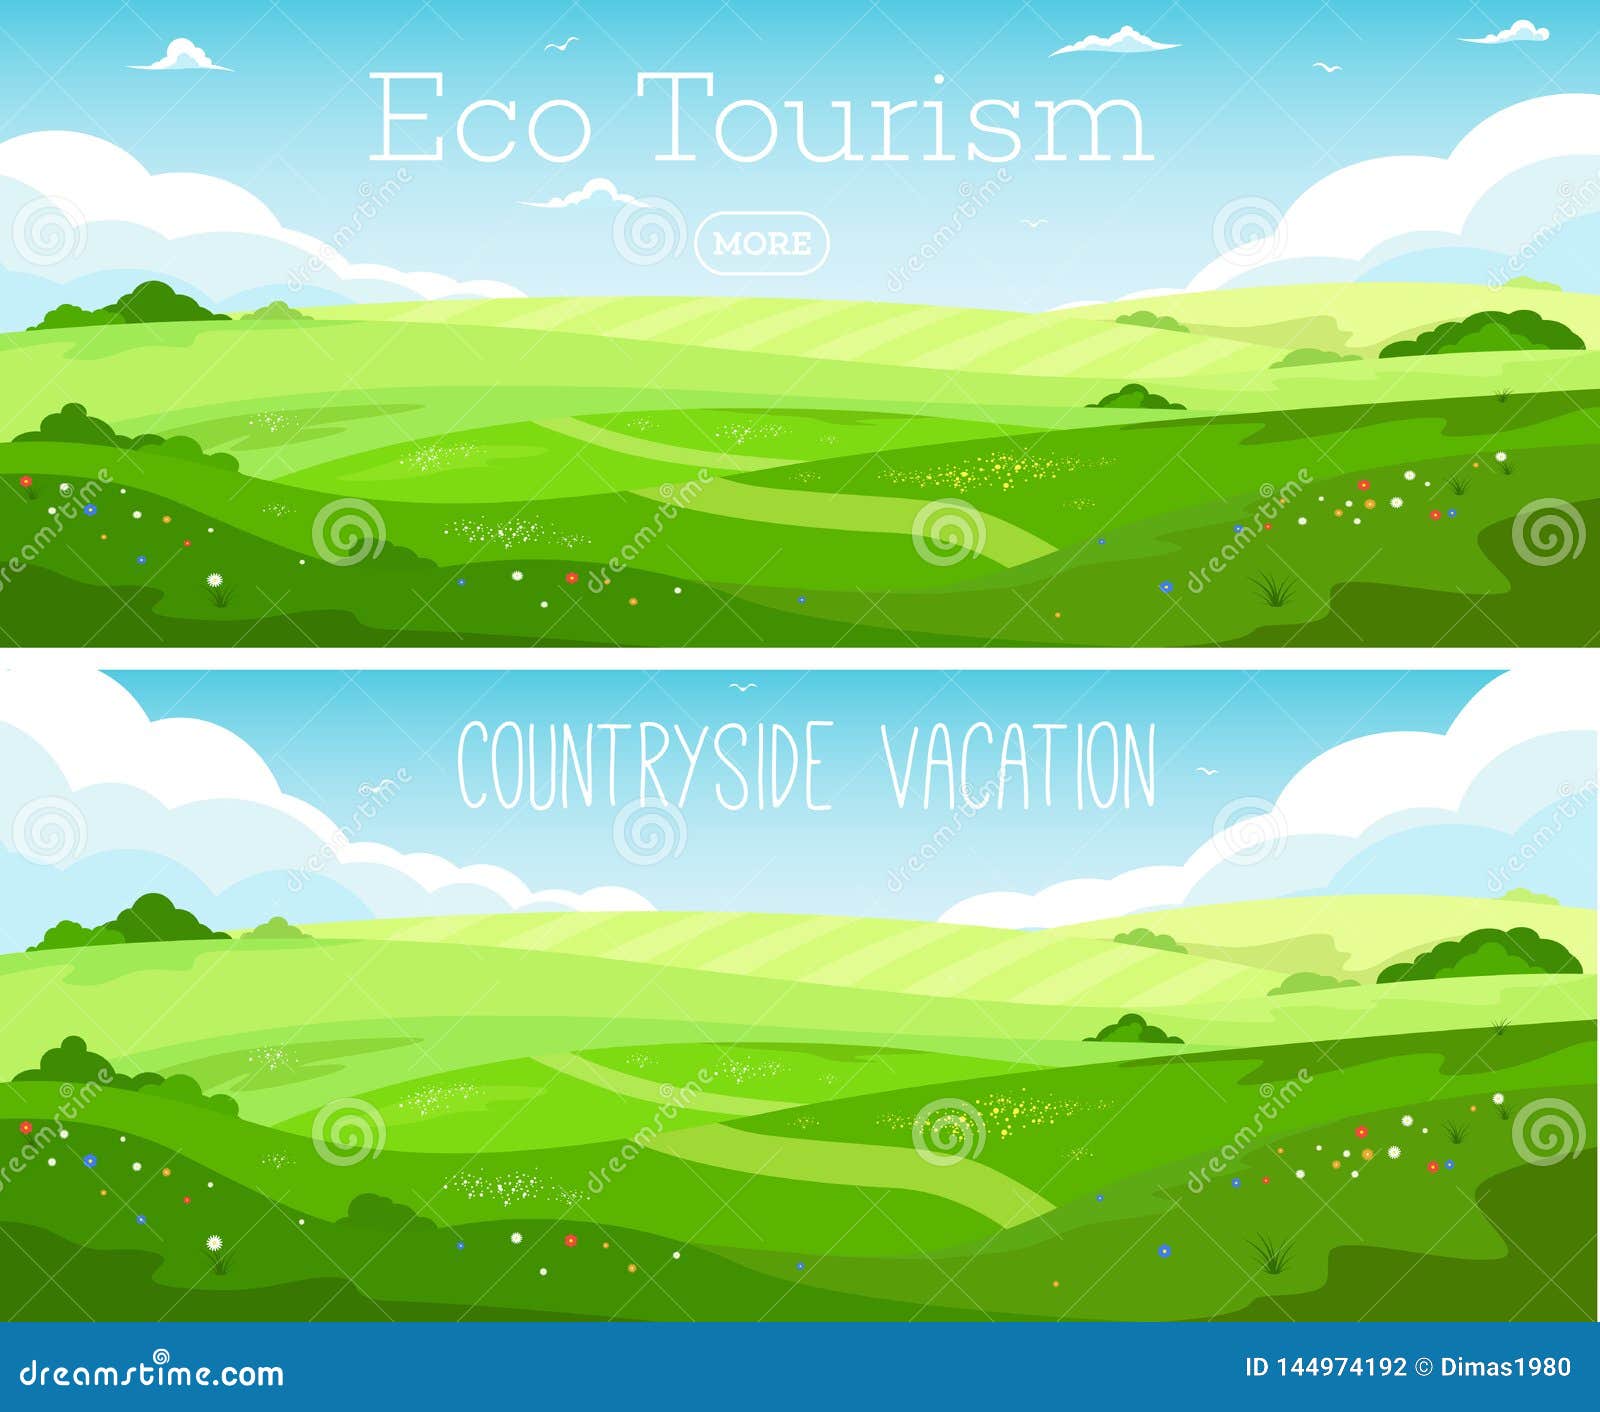 ecotourism and countryside vacation